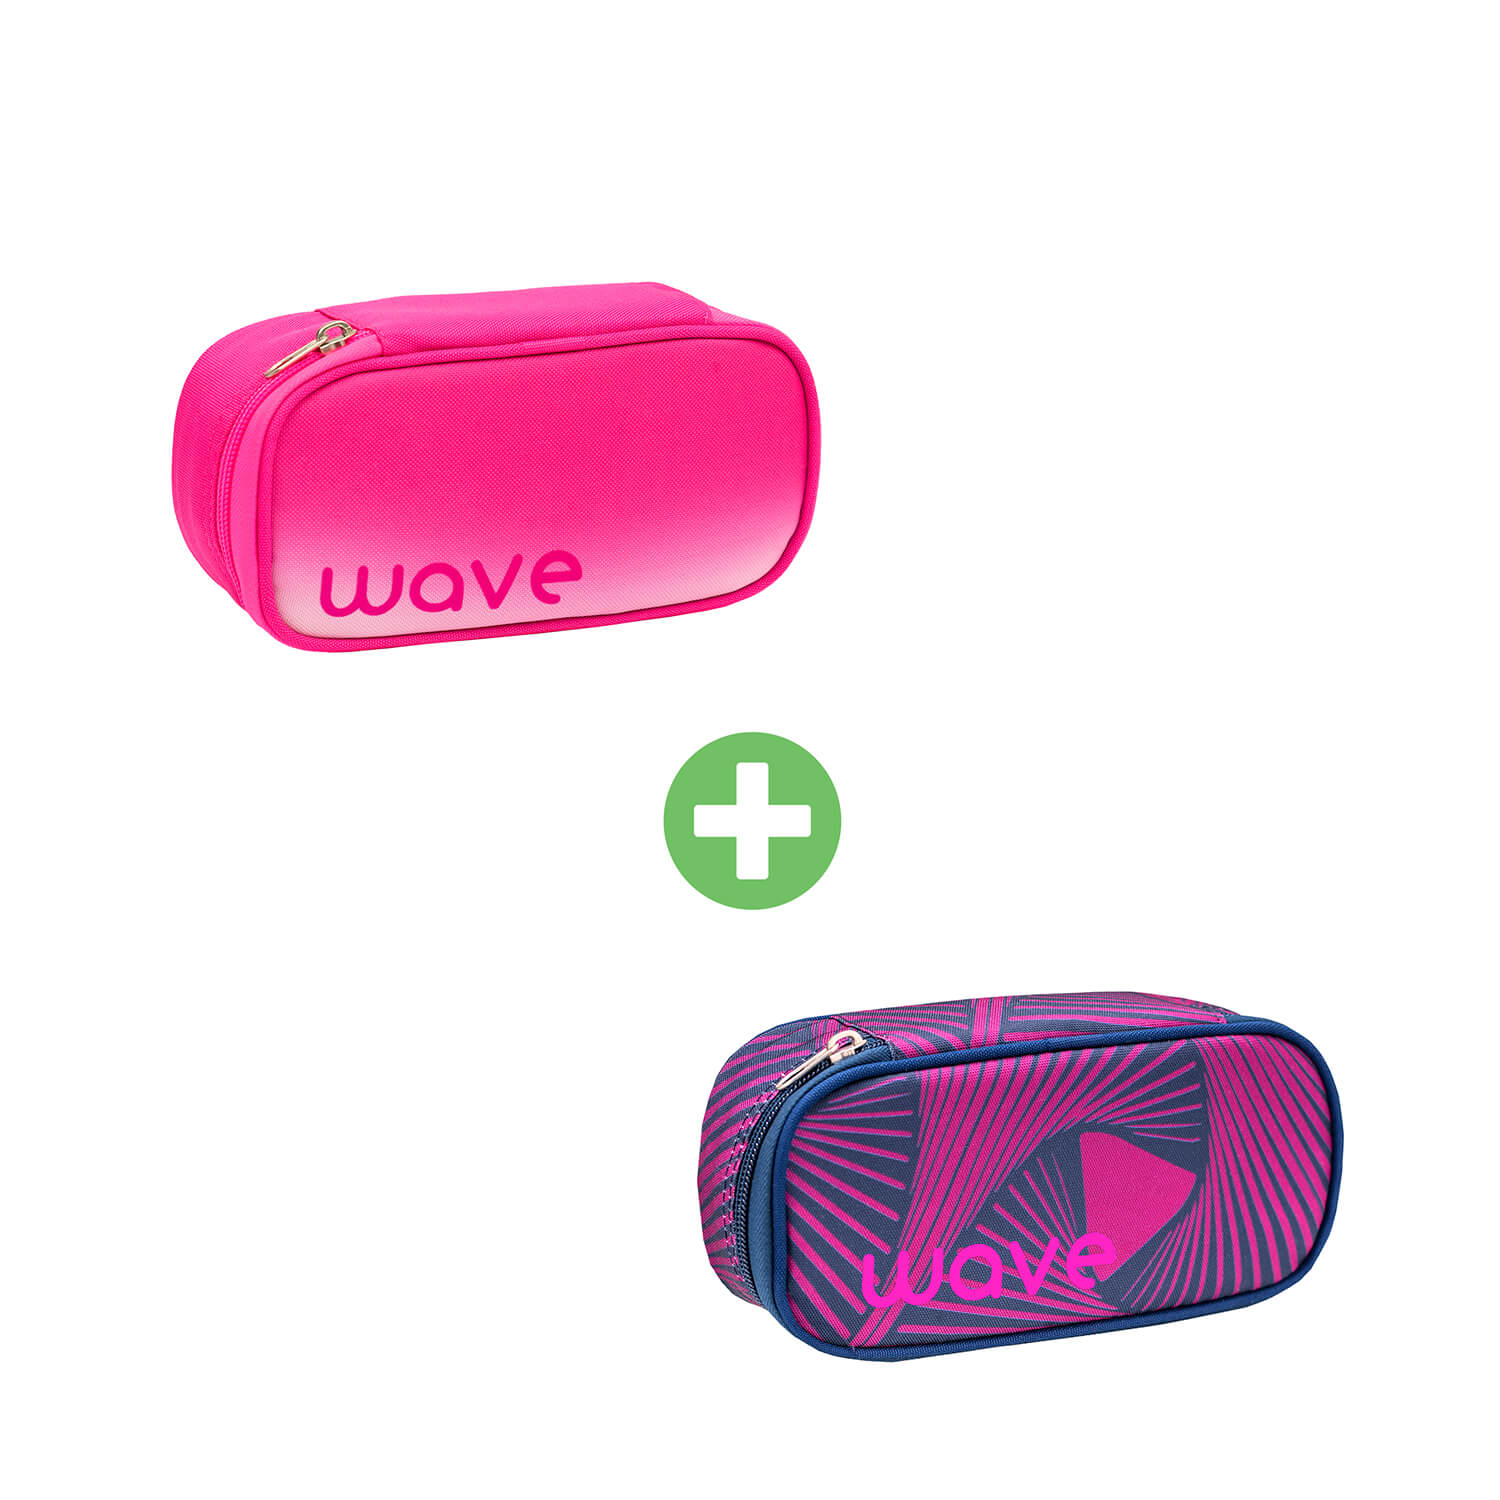 WAVE pencil pouch Ombre light pink - Chaos with GRATIS pencil pouch